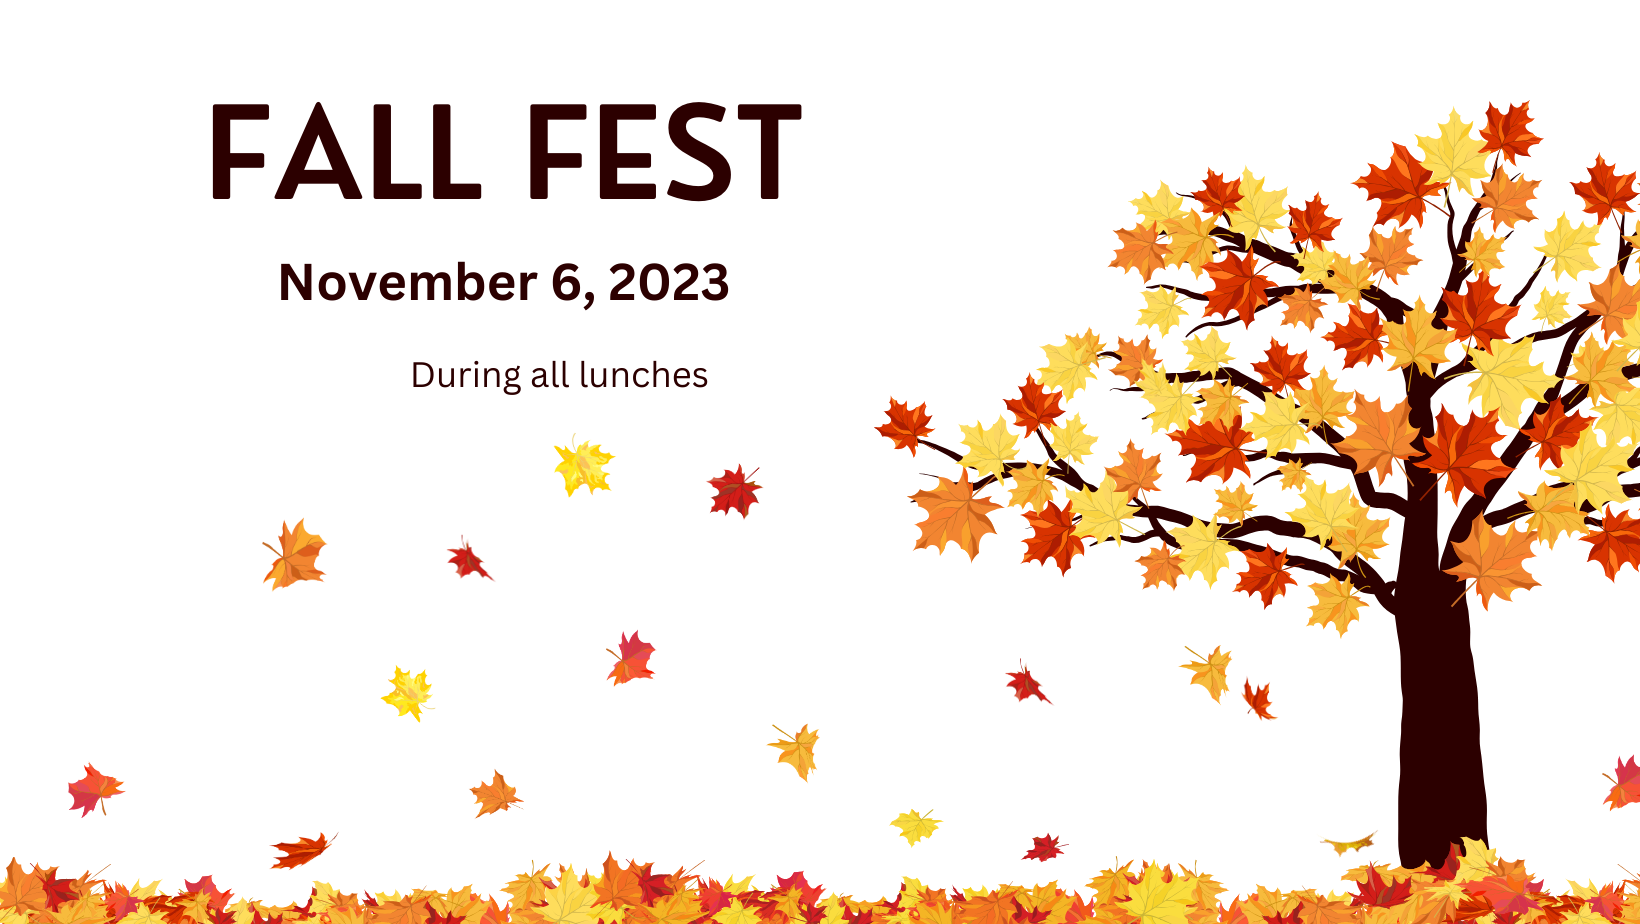 Fall Fest November 6, 2023 During all lunches